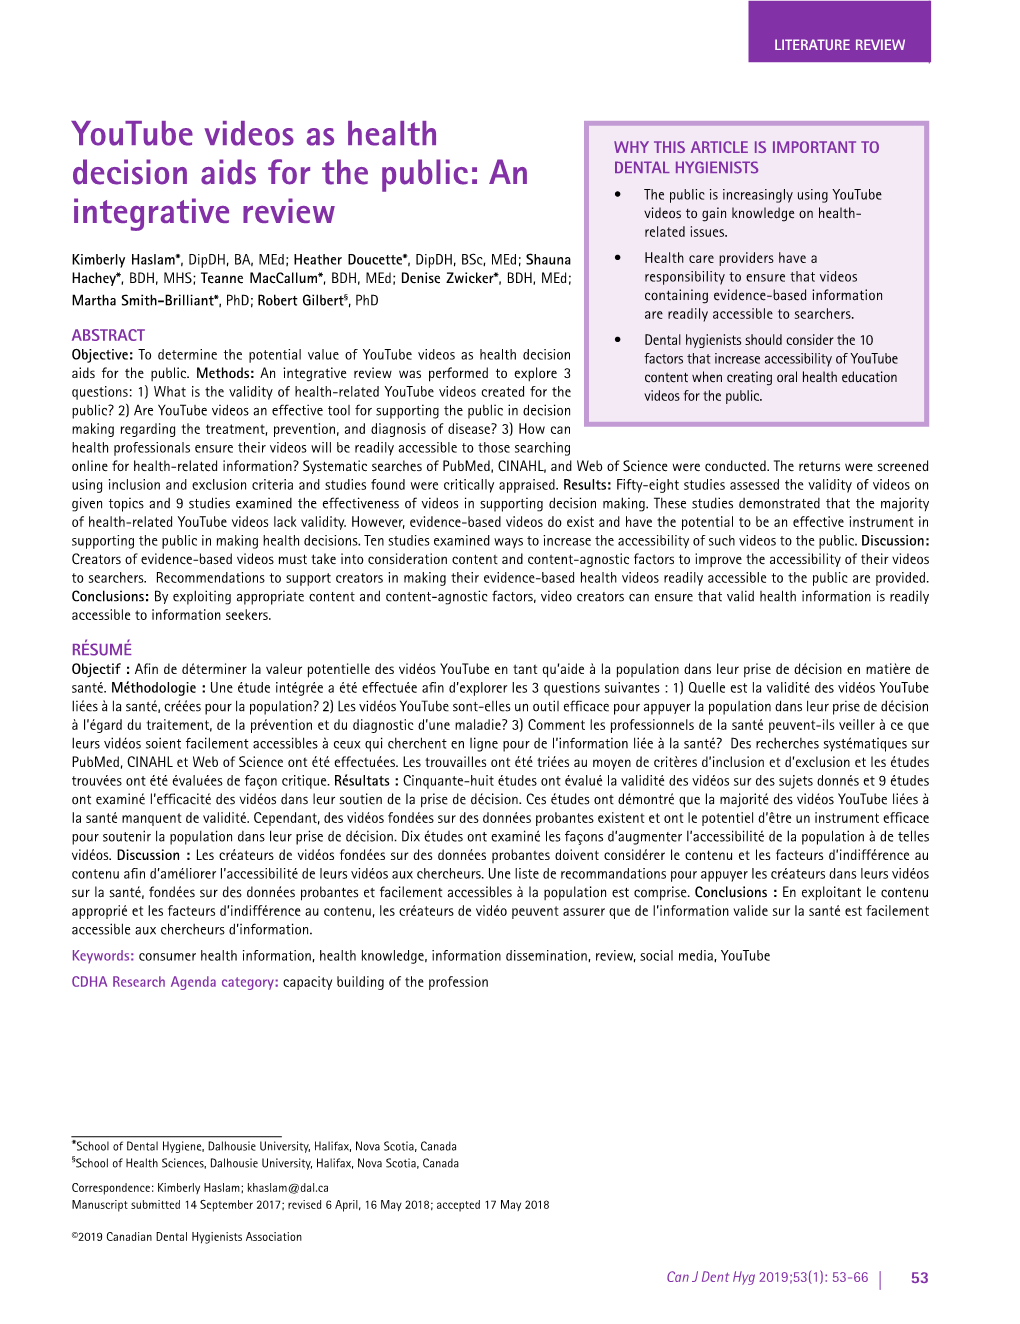 Youtube Videos As Health Decision Aids for the Public: an Integrative